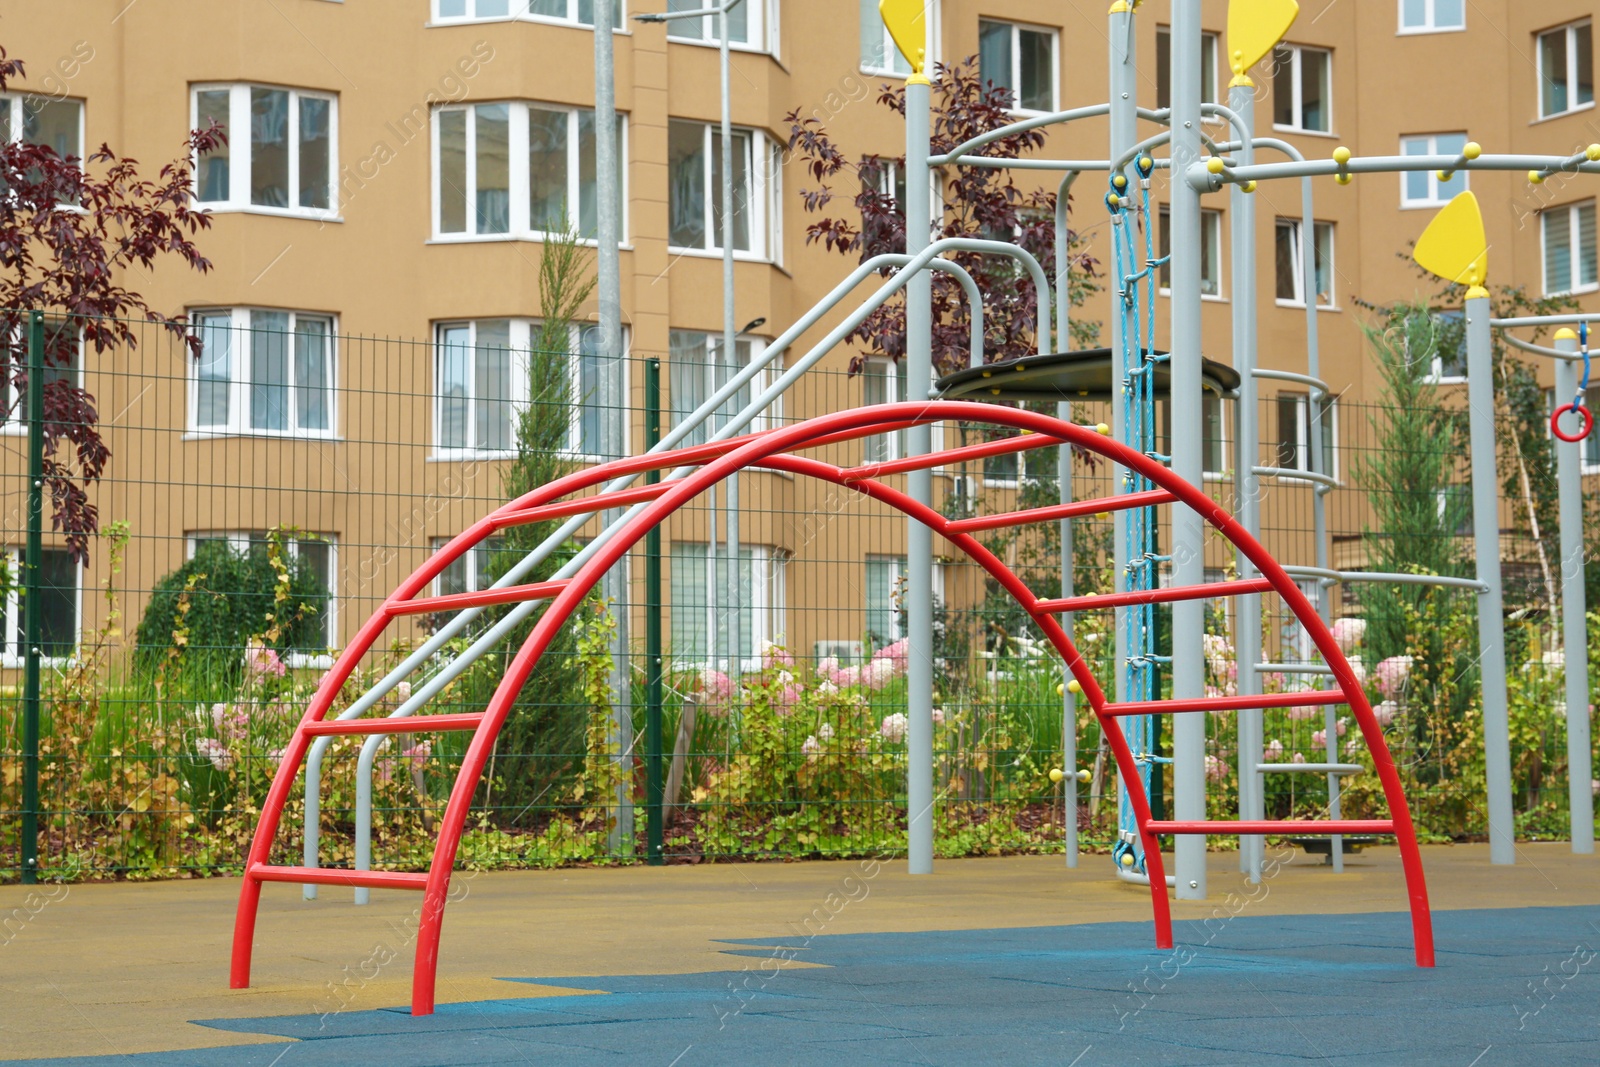 Photo of Red curved ladder on outdoor playground in residential area